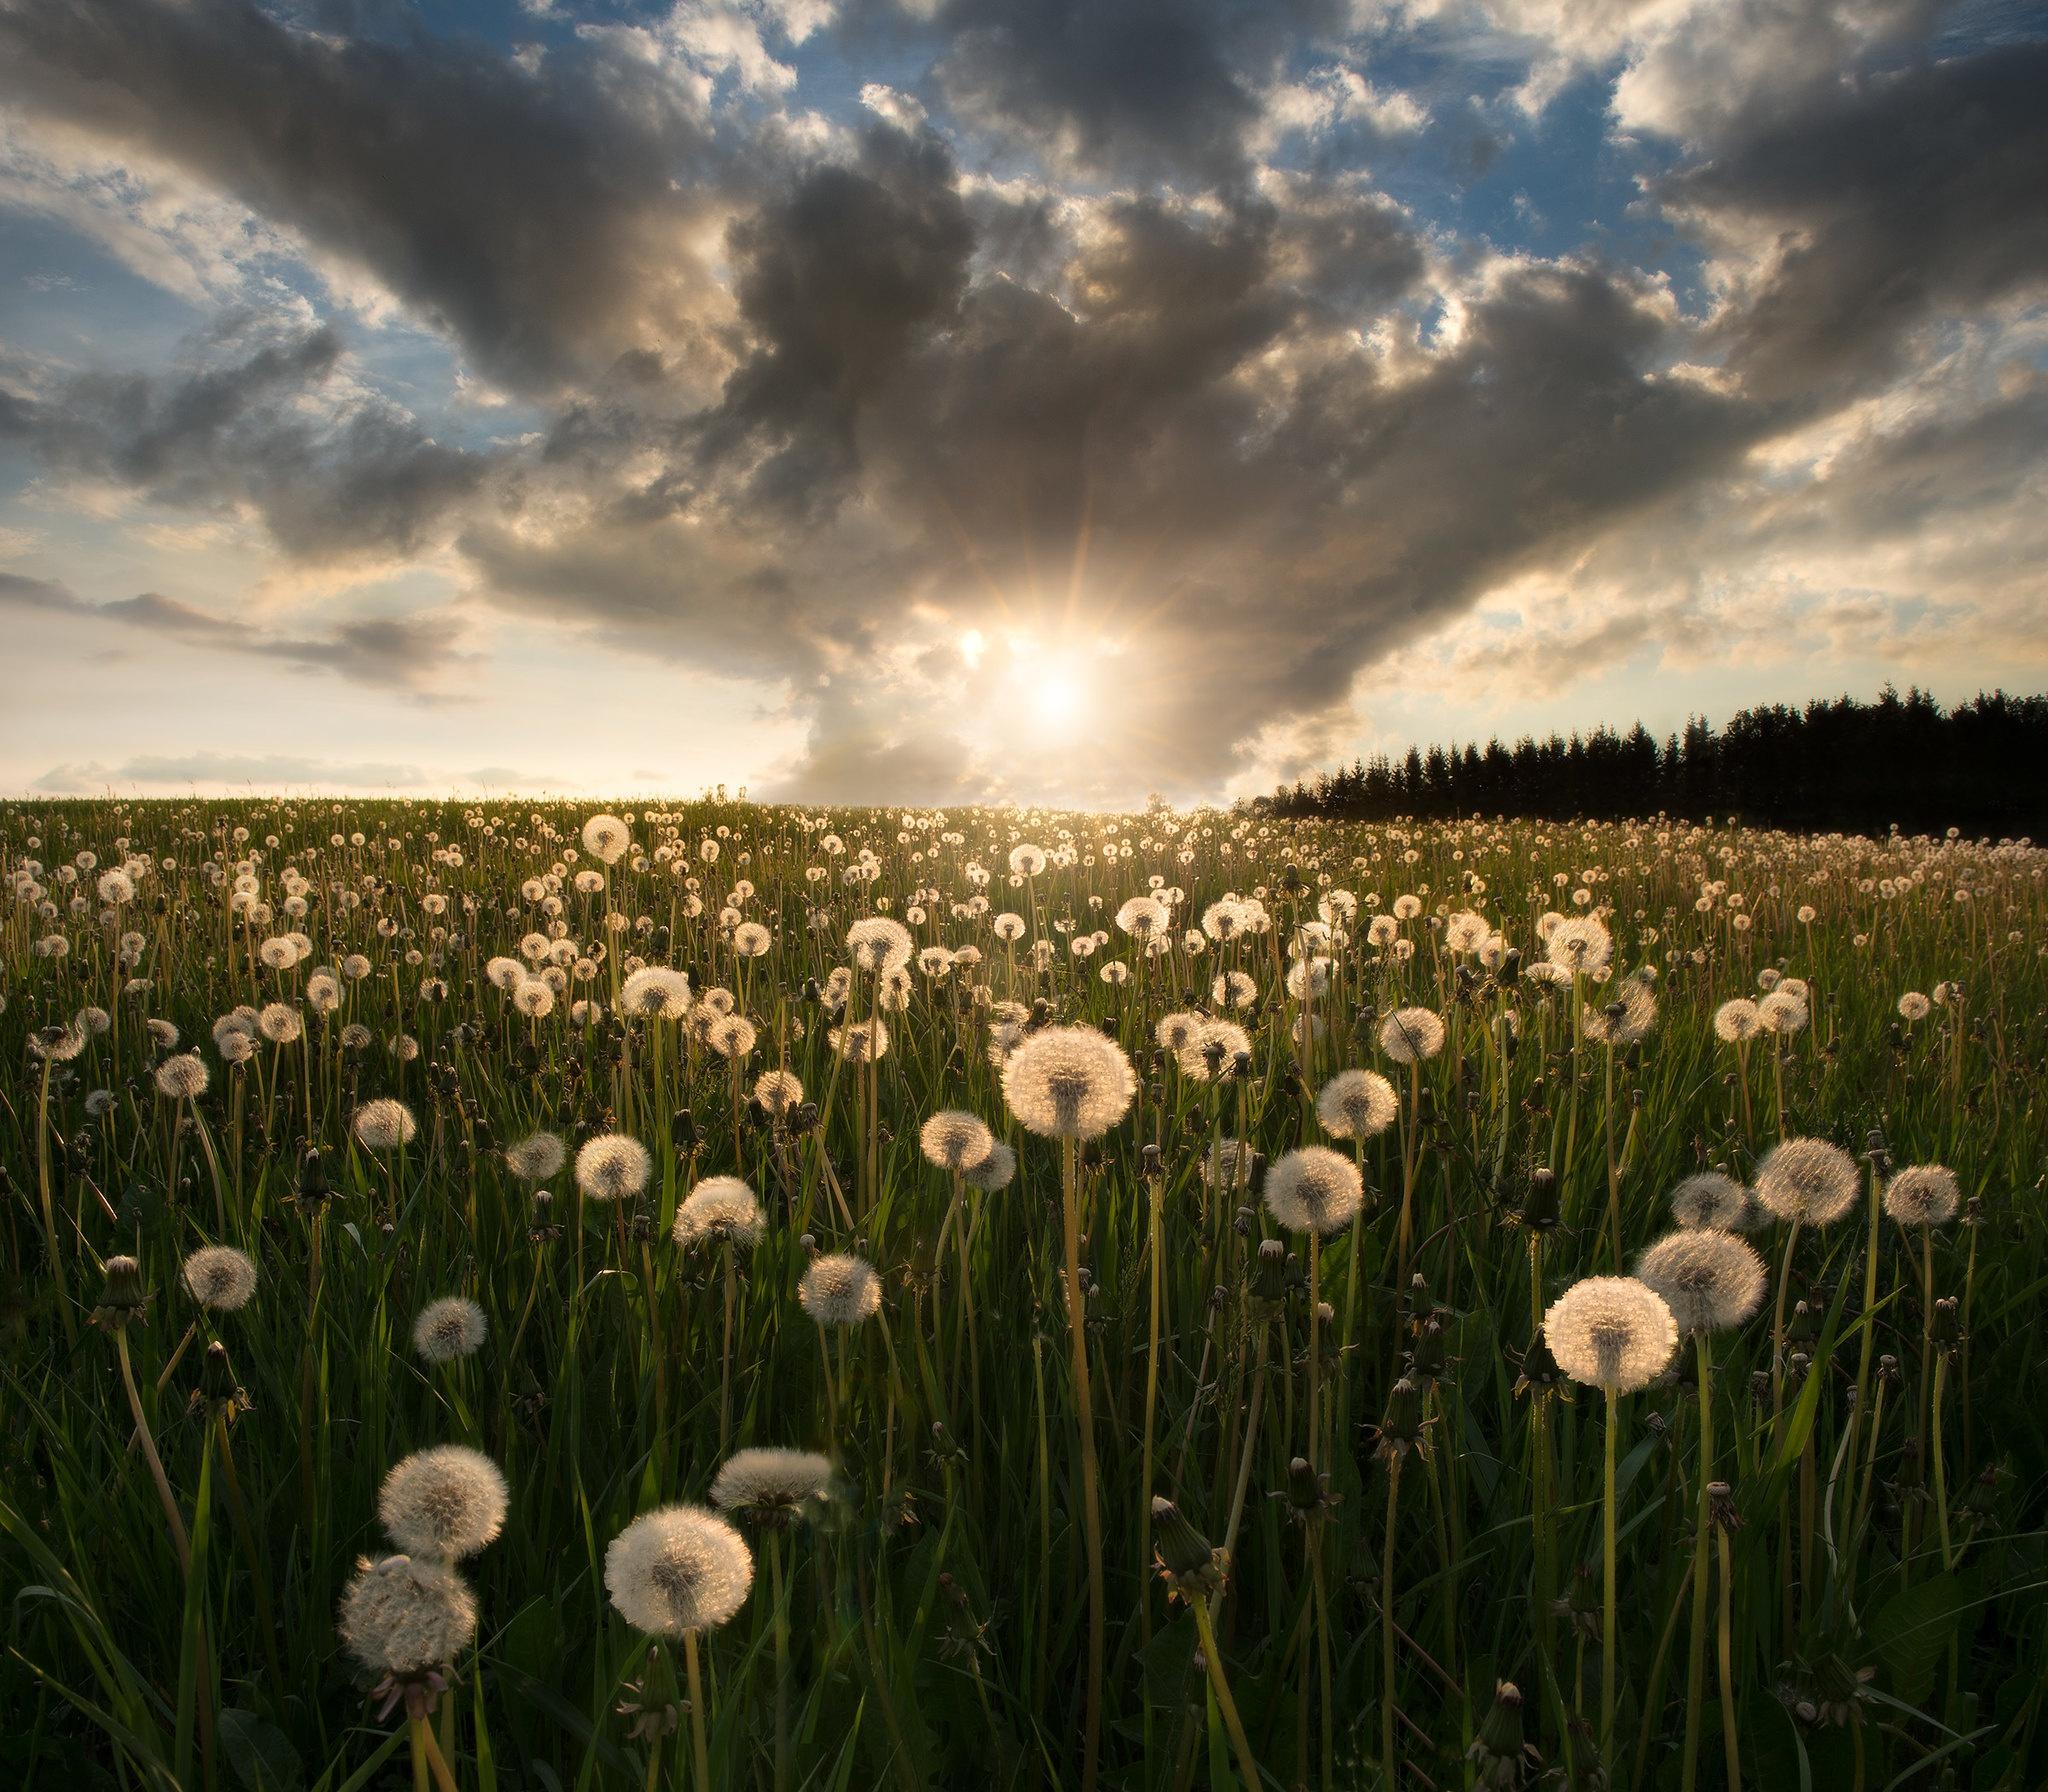 A field of dandelions with the sun setting in the background. - Dandelions